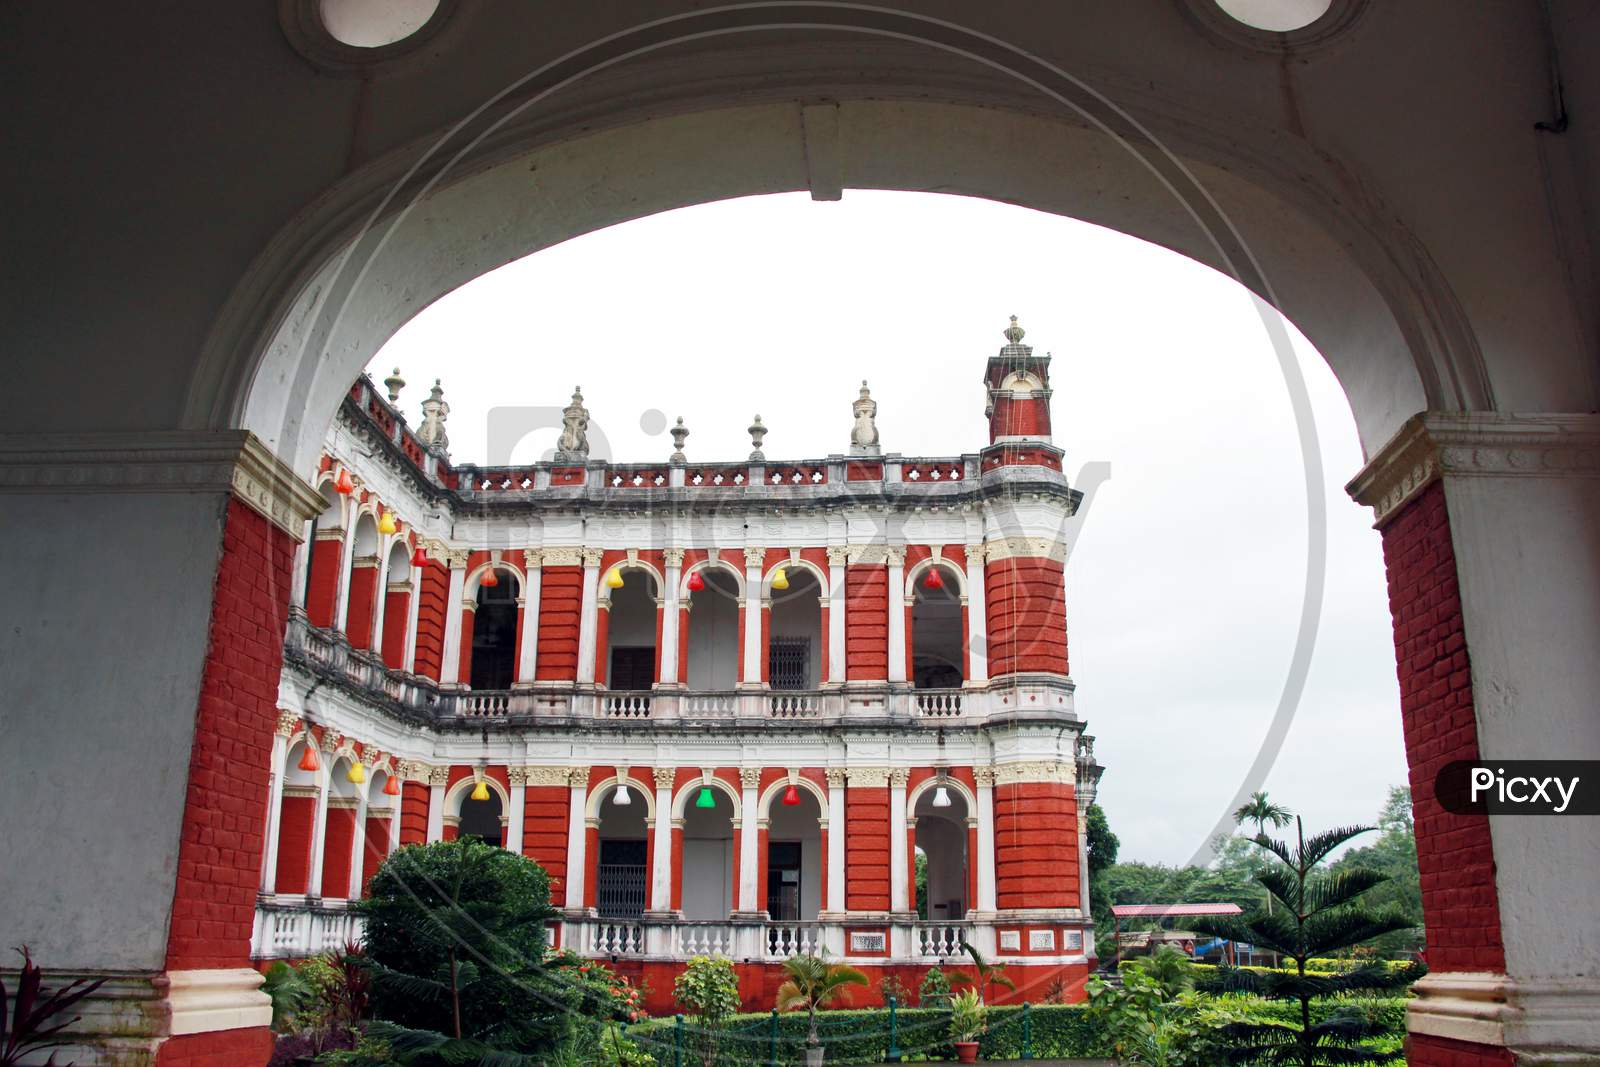 Cooch Behar Palace, also called the Victor Jubilee Palace. Ancient, classic. Cooch Behar Rajbari in West Bengal, India